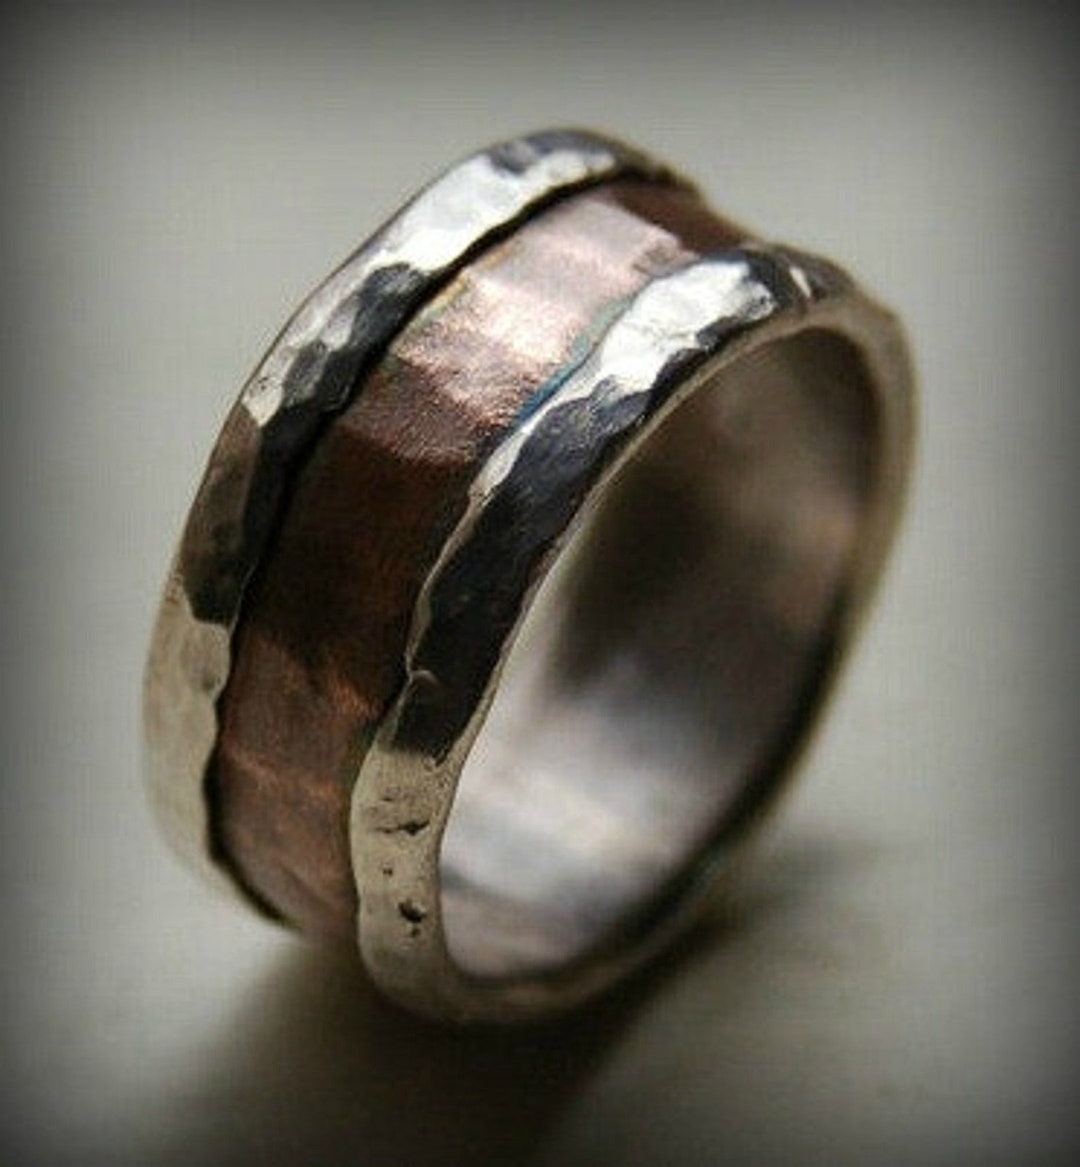 Rustic Wedding Band Fine Silver and 14K Rose Gold Handmade Artisan ...